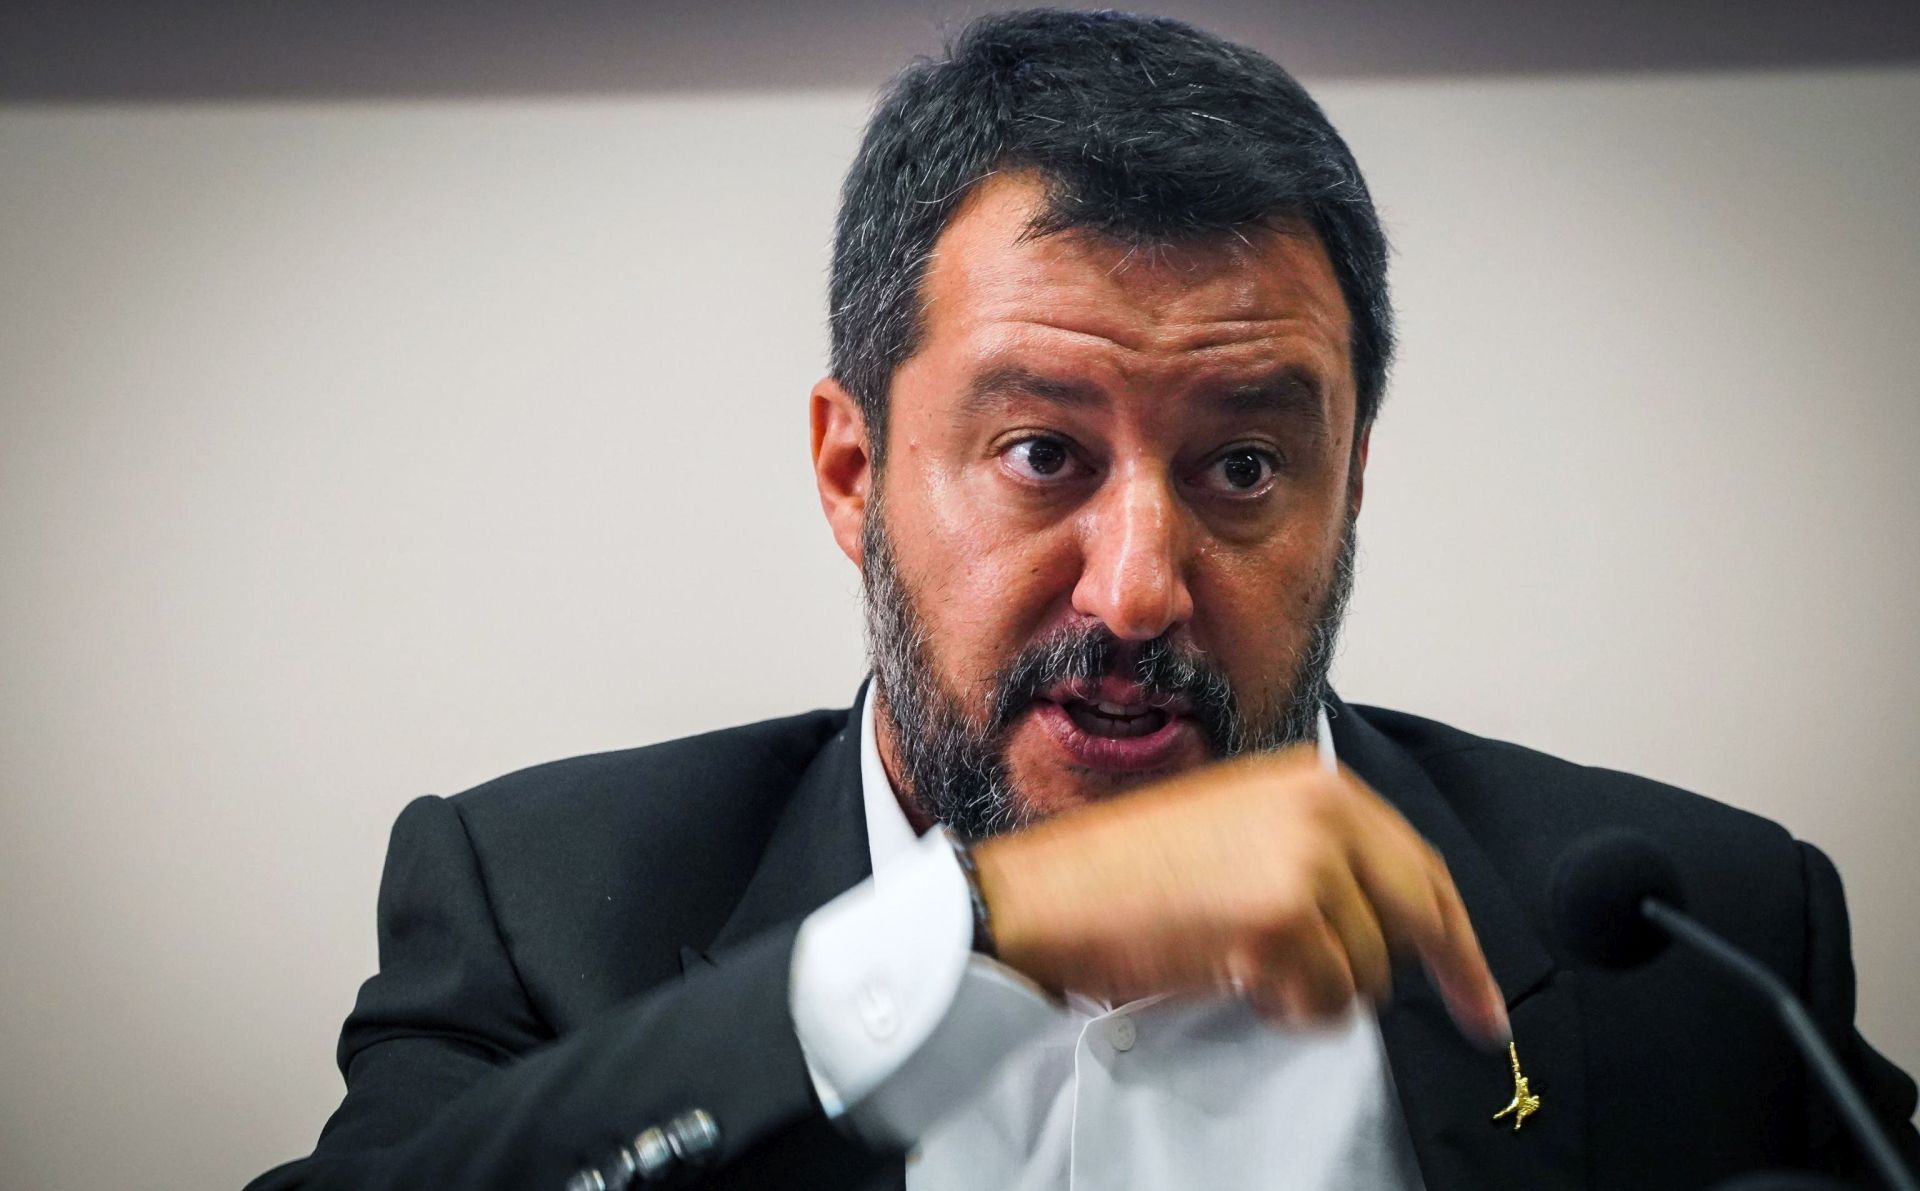 epa07774949 Italian Deputy Prime Minister and Interior Minister Matteo Salvini speaks to journalists at the end of a security conference in Castelvolturno, southern Italy, 15 August 2019.  EPA/CESARE ABBATE